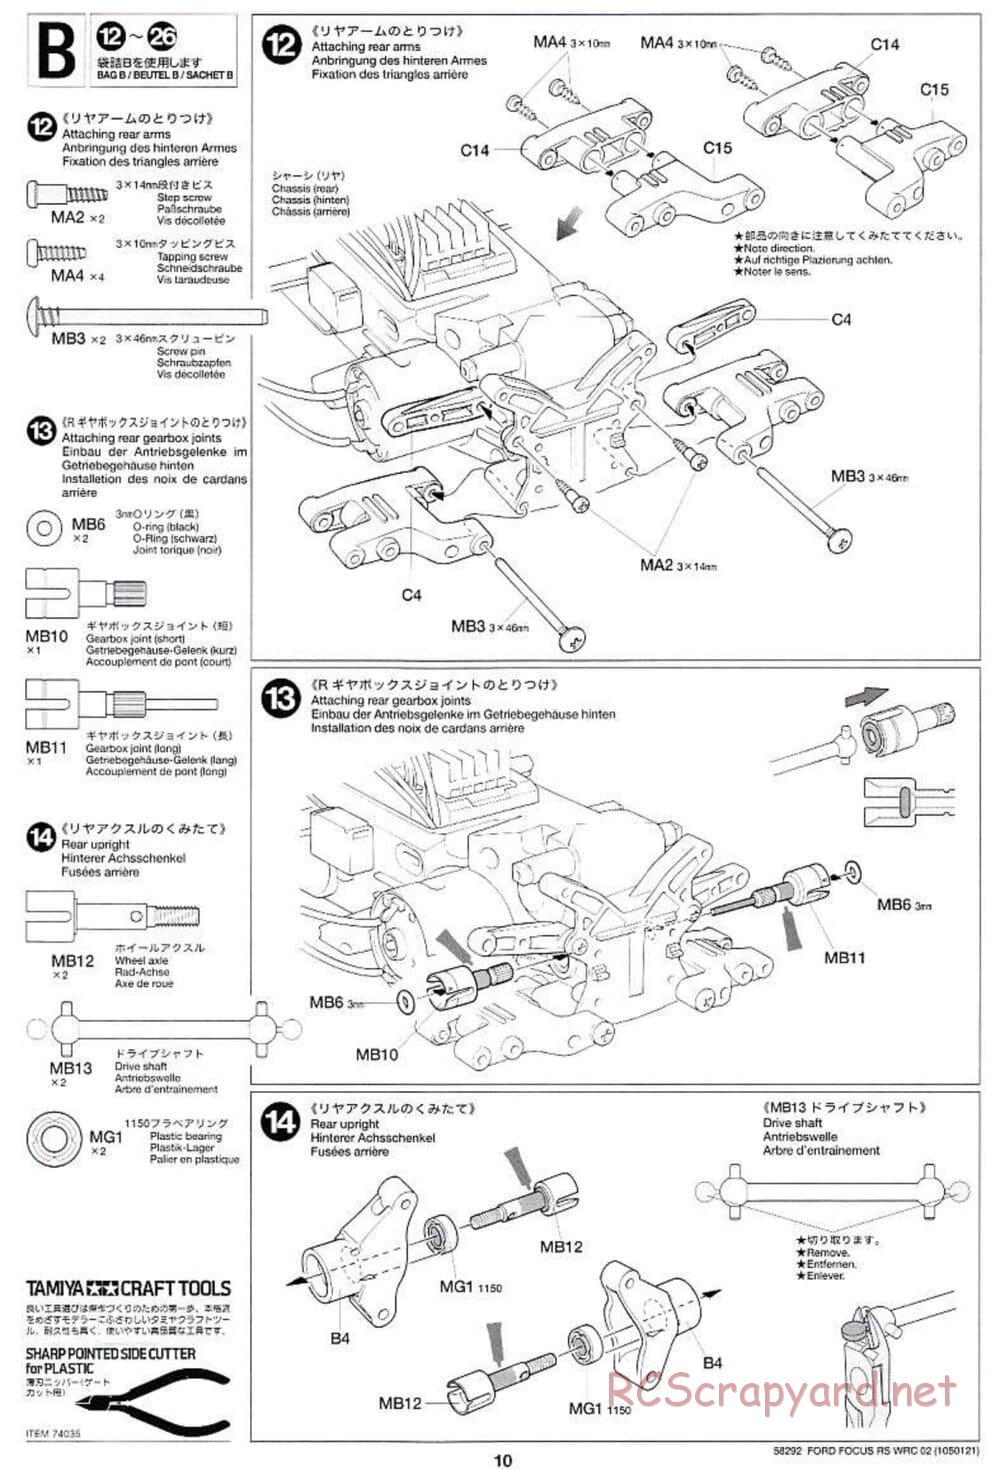 Tamiya - Ford Focus RS WRC 02 - TL-01 Chassis - Manual - Page 10